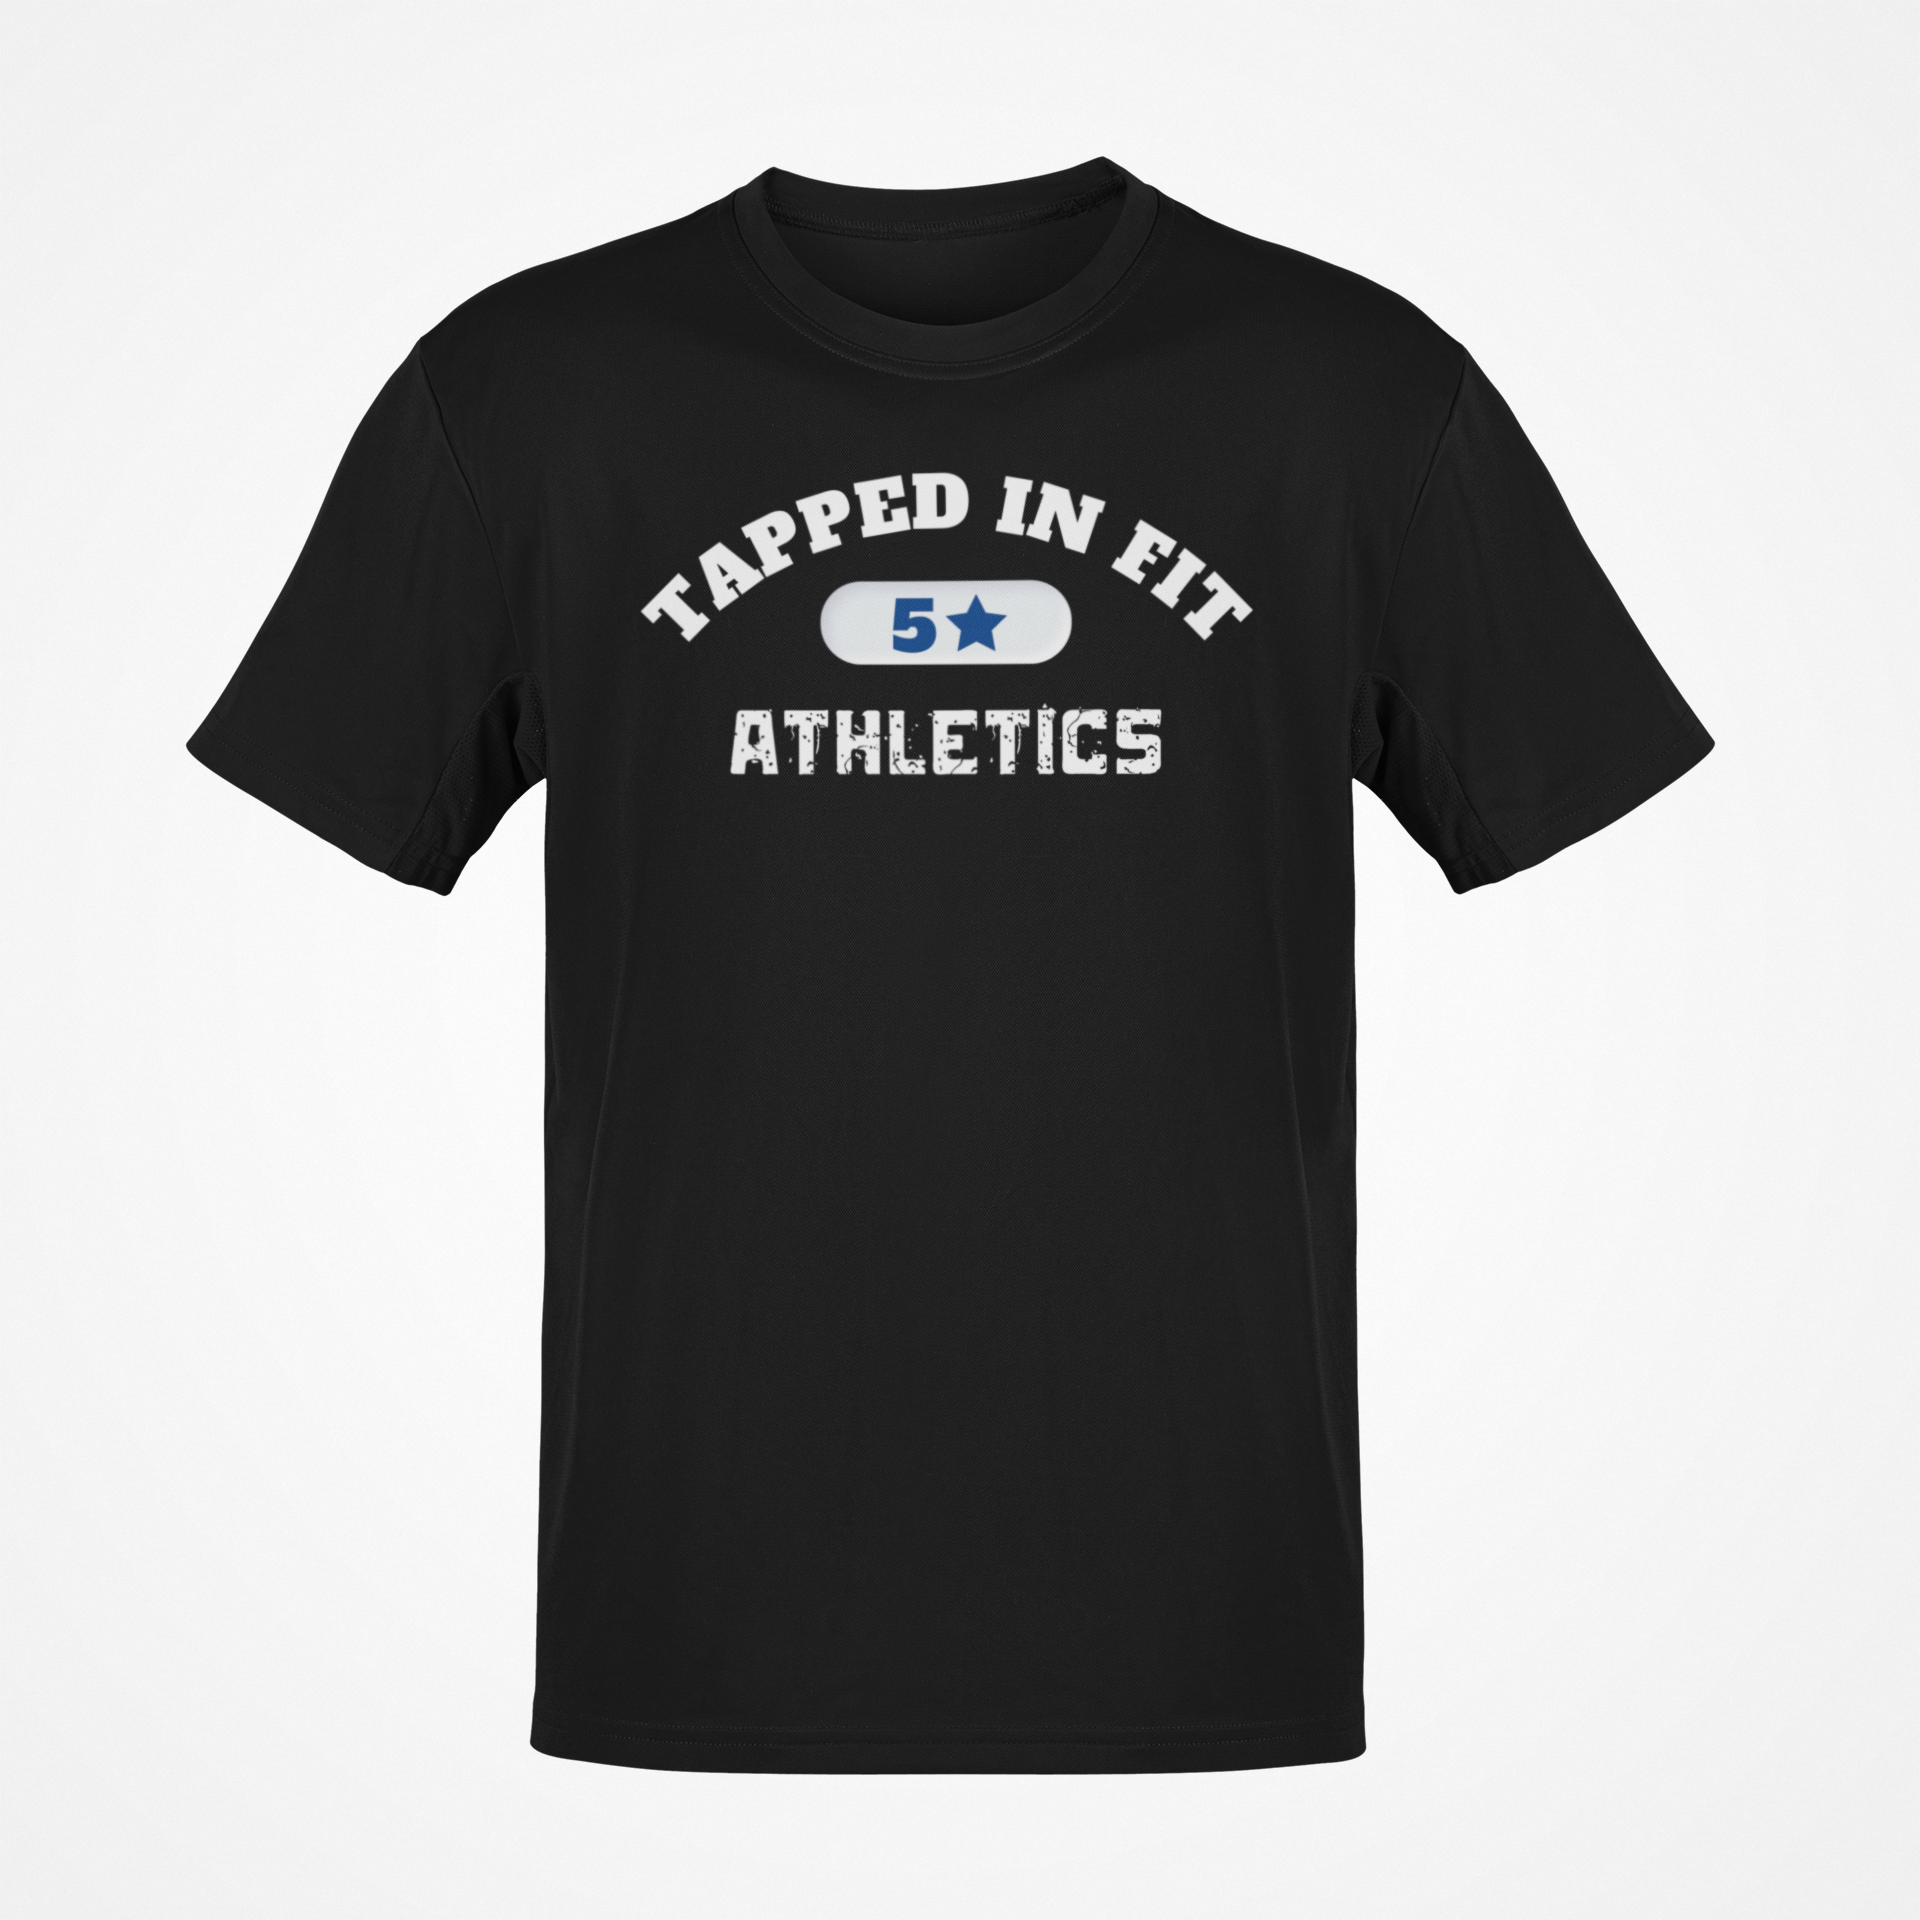 Tapped In Fit 5 Star Athletics